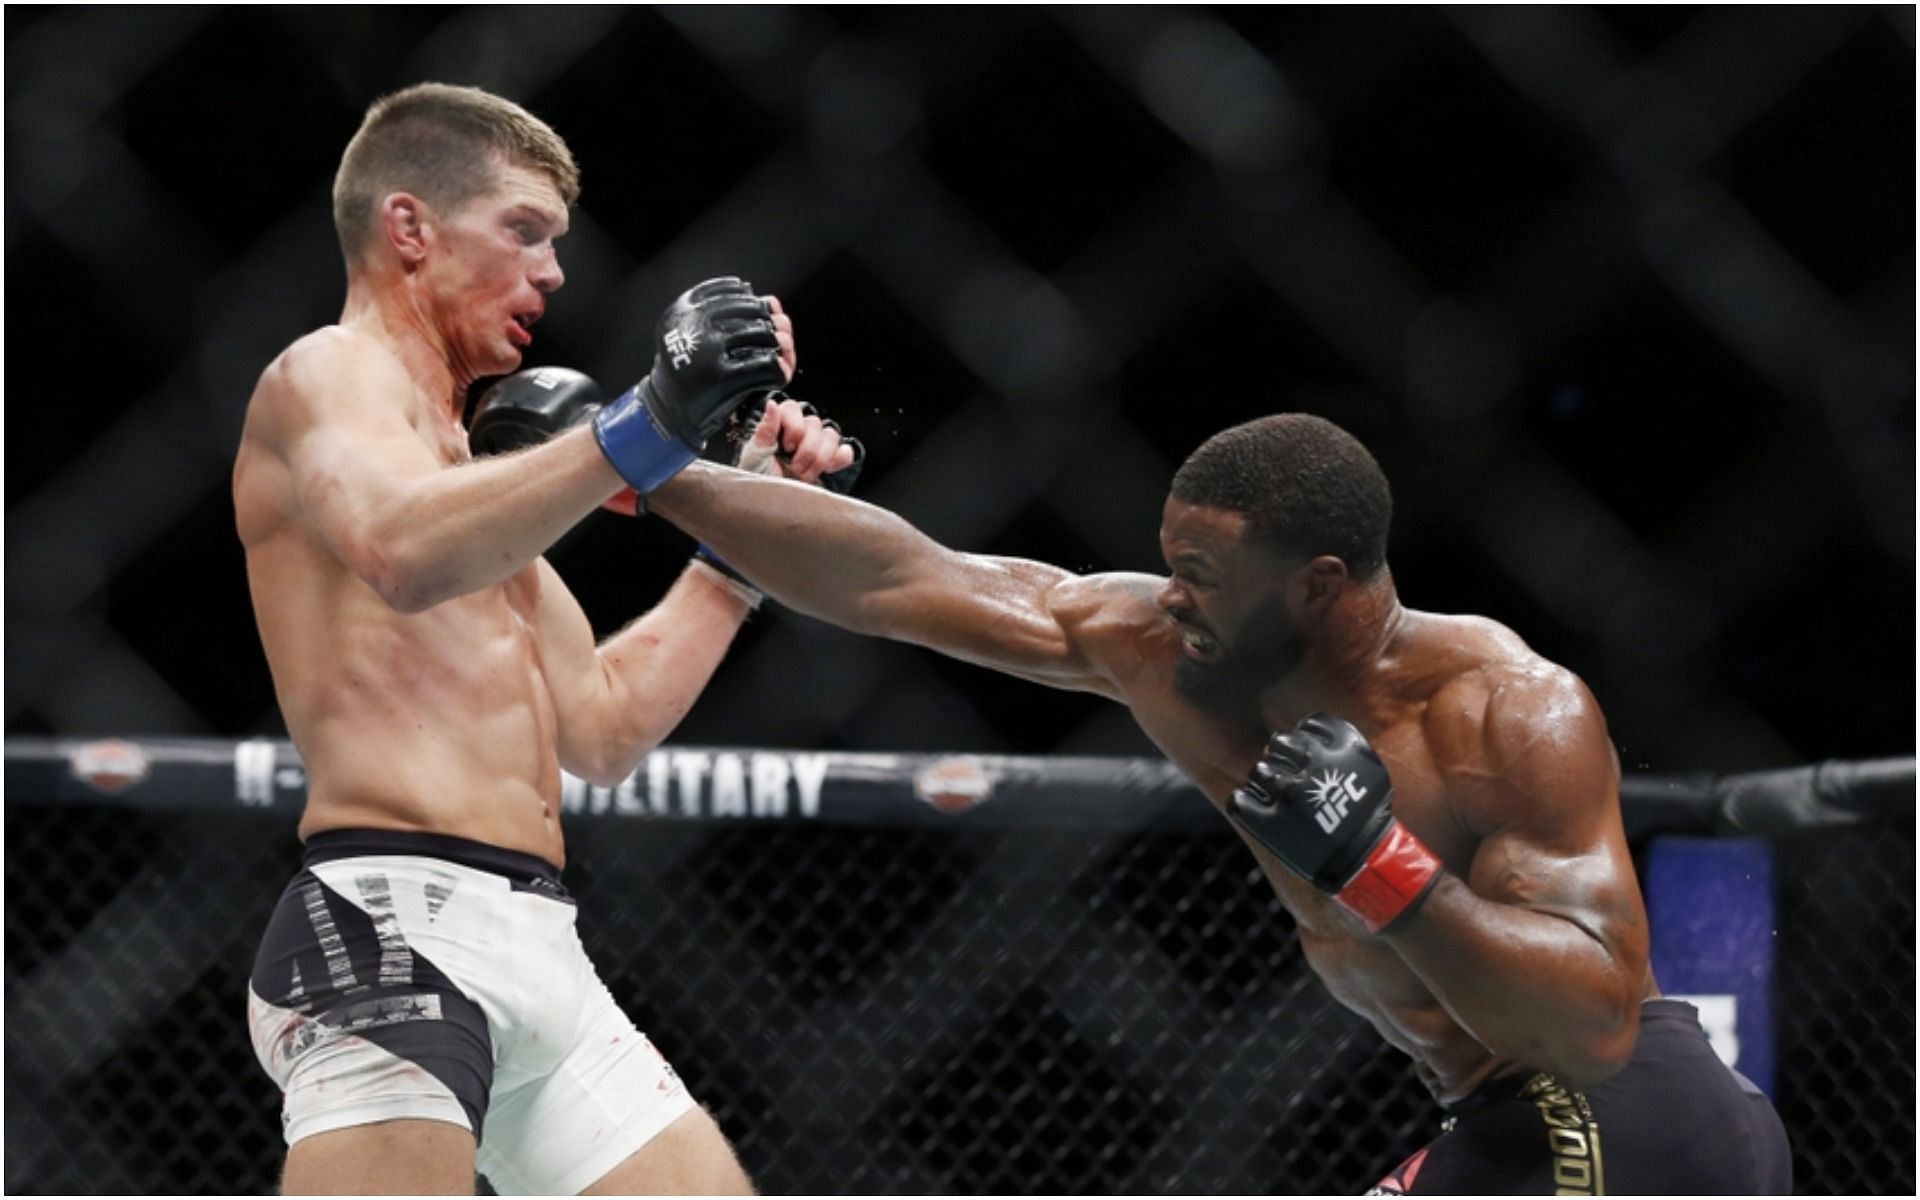 Stephen Thompson fighting Woodley at UFC 205